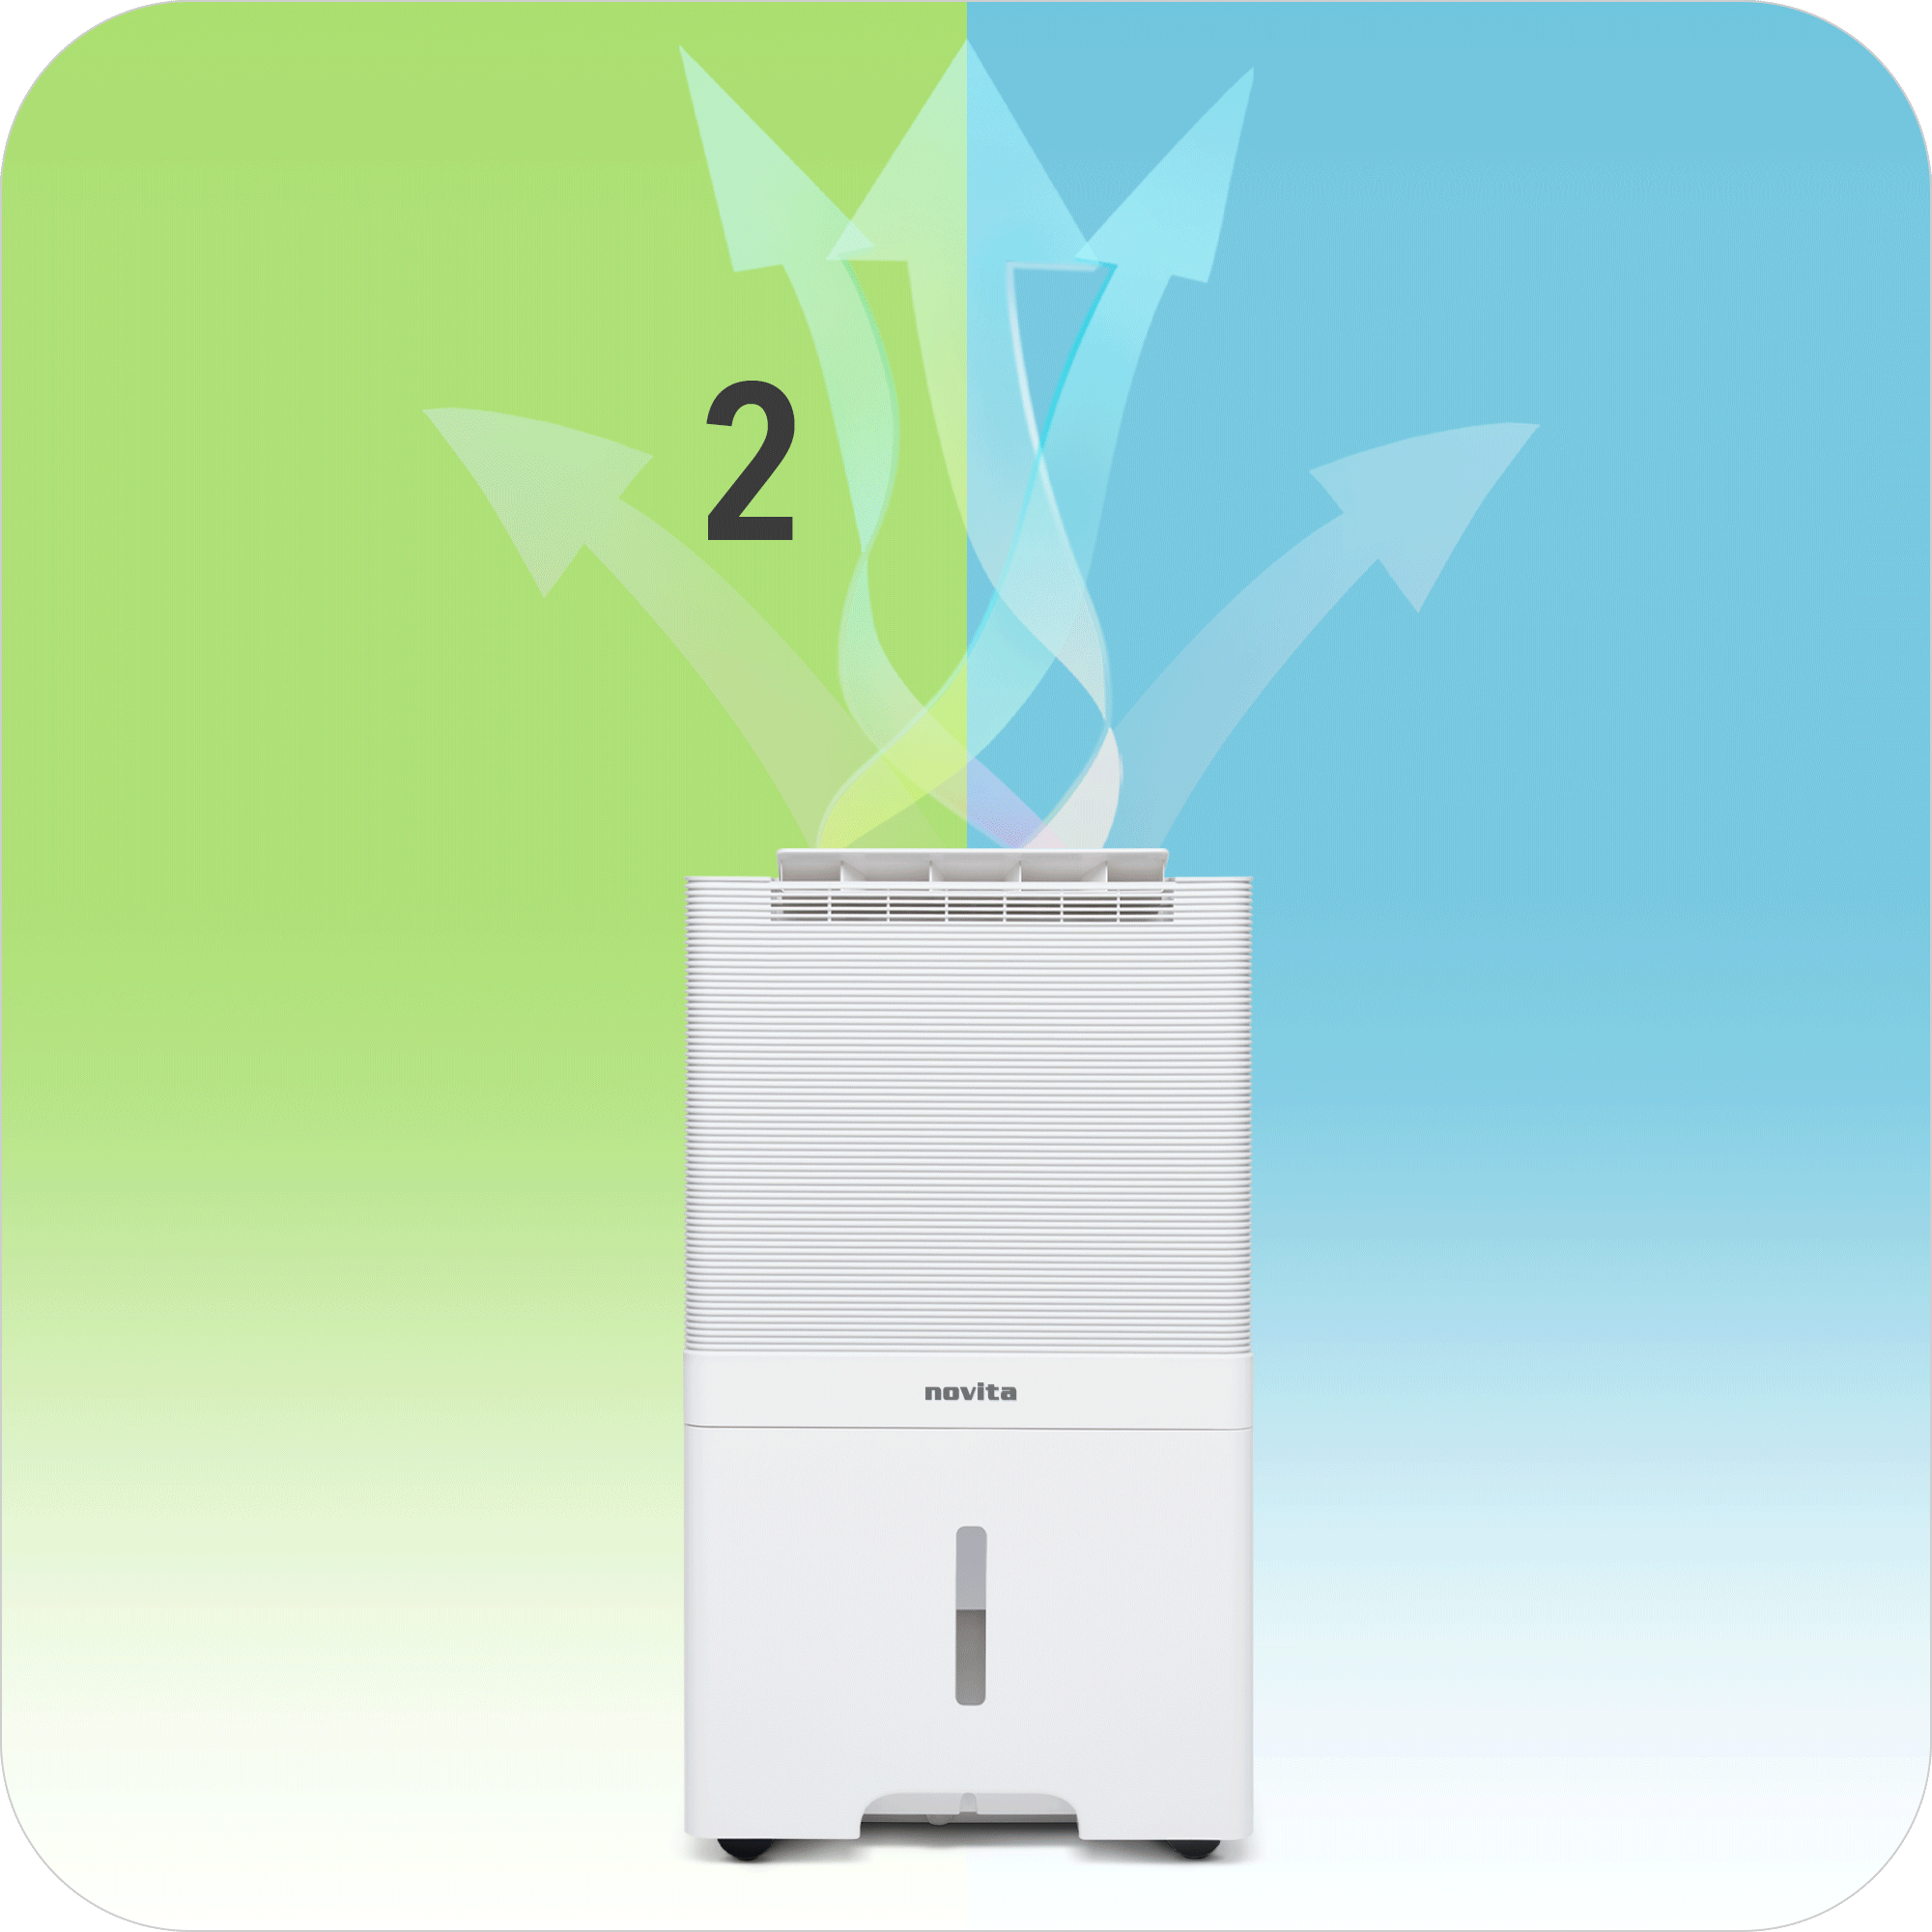 A novita Air Purifier + Dehumidifier The 2-In-1 ND60 with two arrows pointing in different directions.